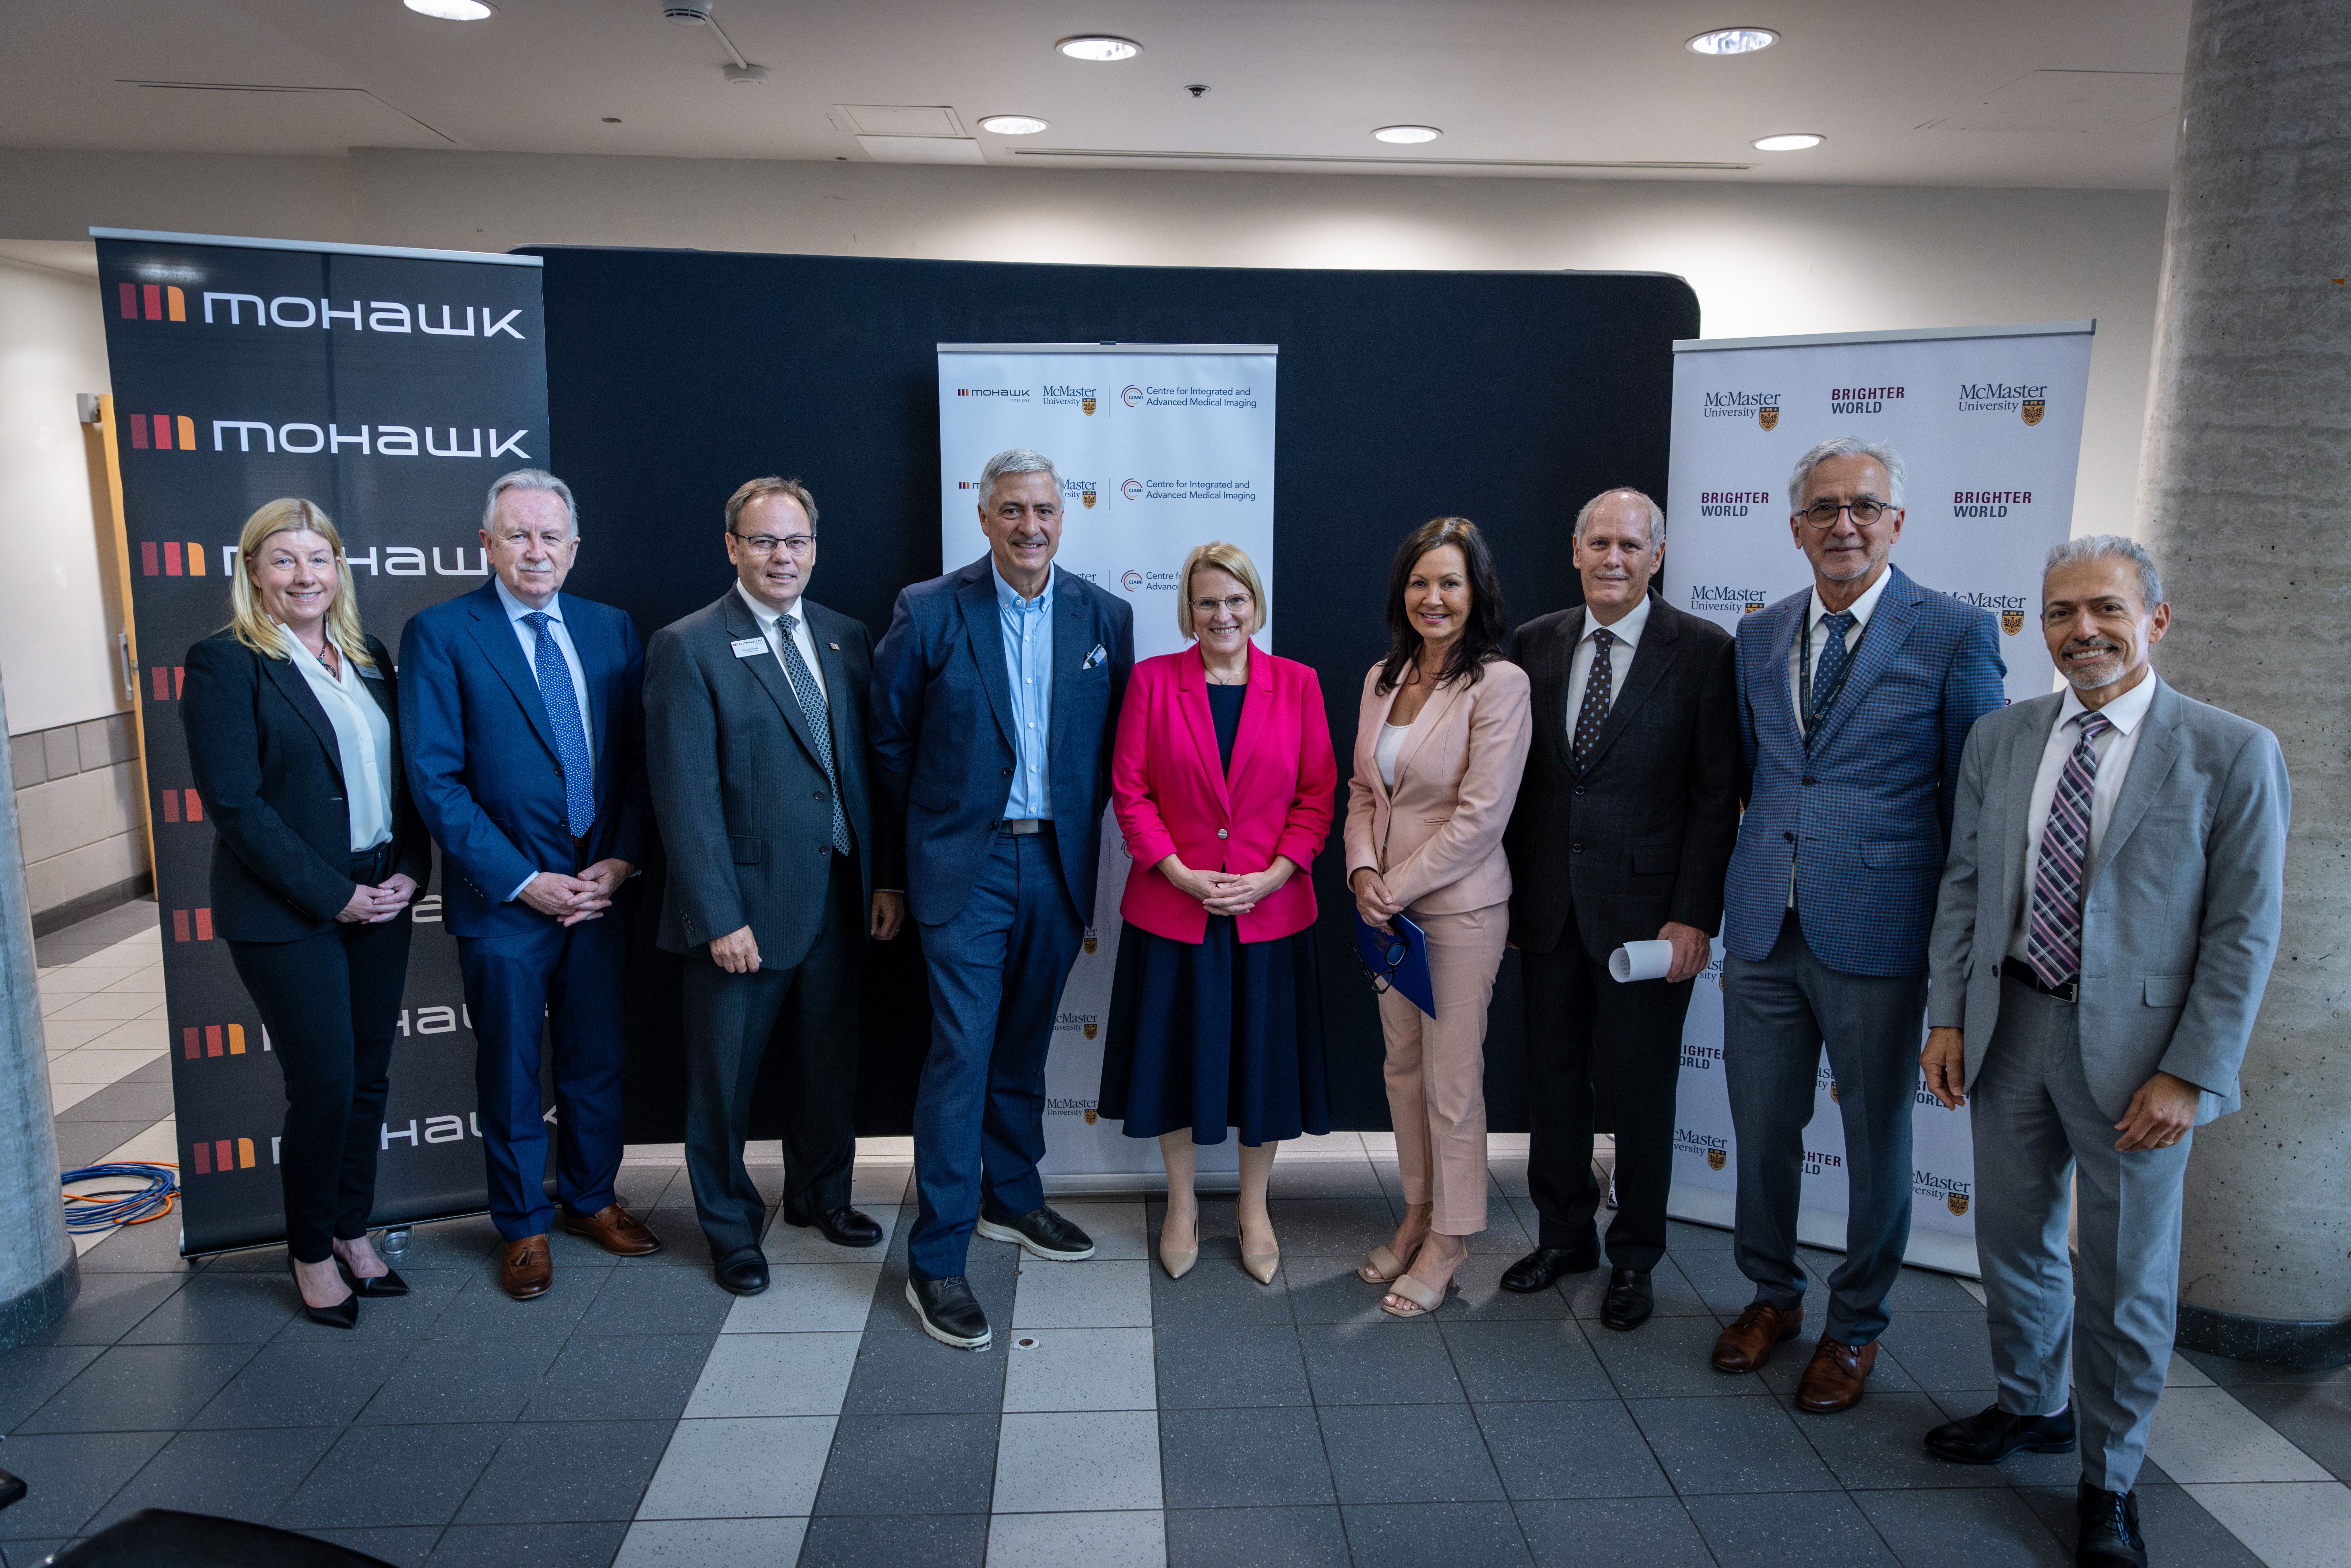 The new Centre for Integrated and Advanced Imaging aims to cut MRI wait times, improve patient experience and integrate education and clinical care.